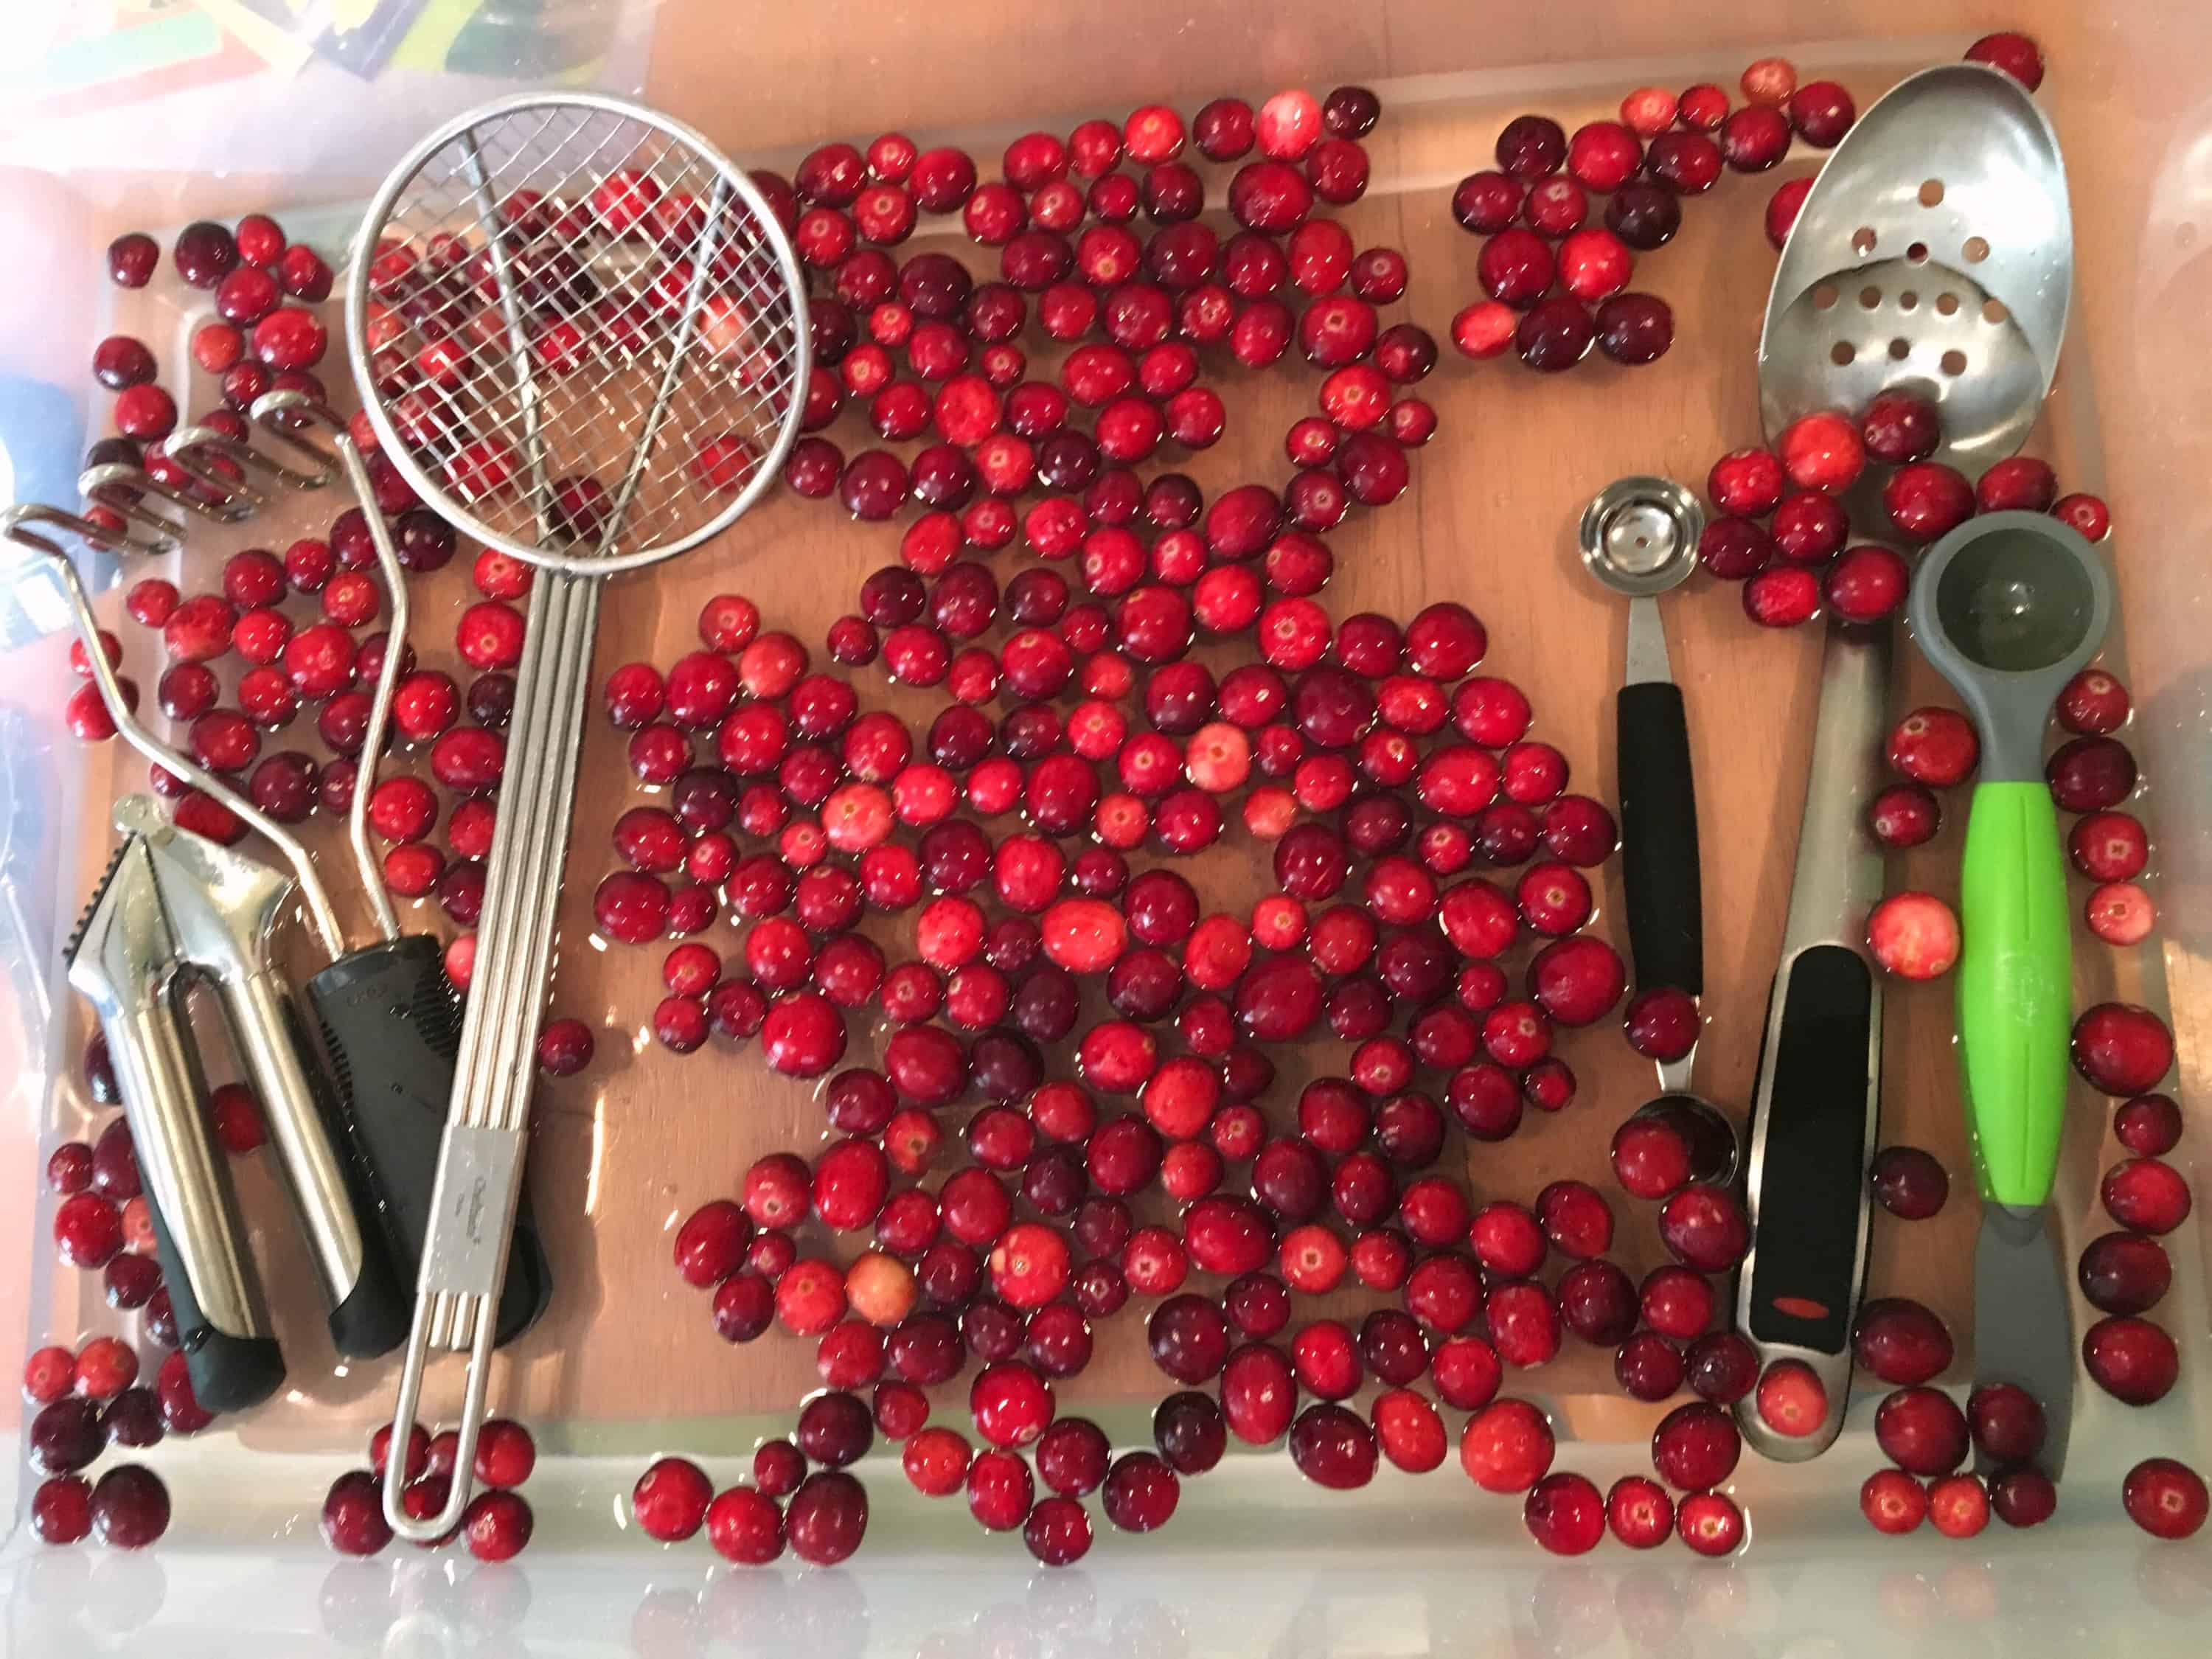 Make an indoor cranberry bog for some simple science and sensory play with kids! A hands-on activity like this will leave an impression.